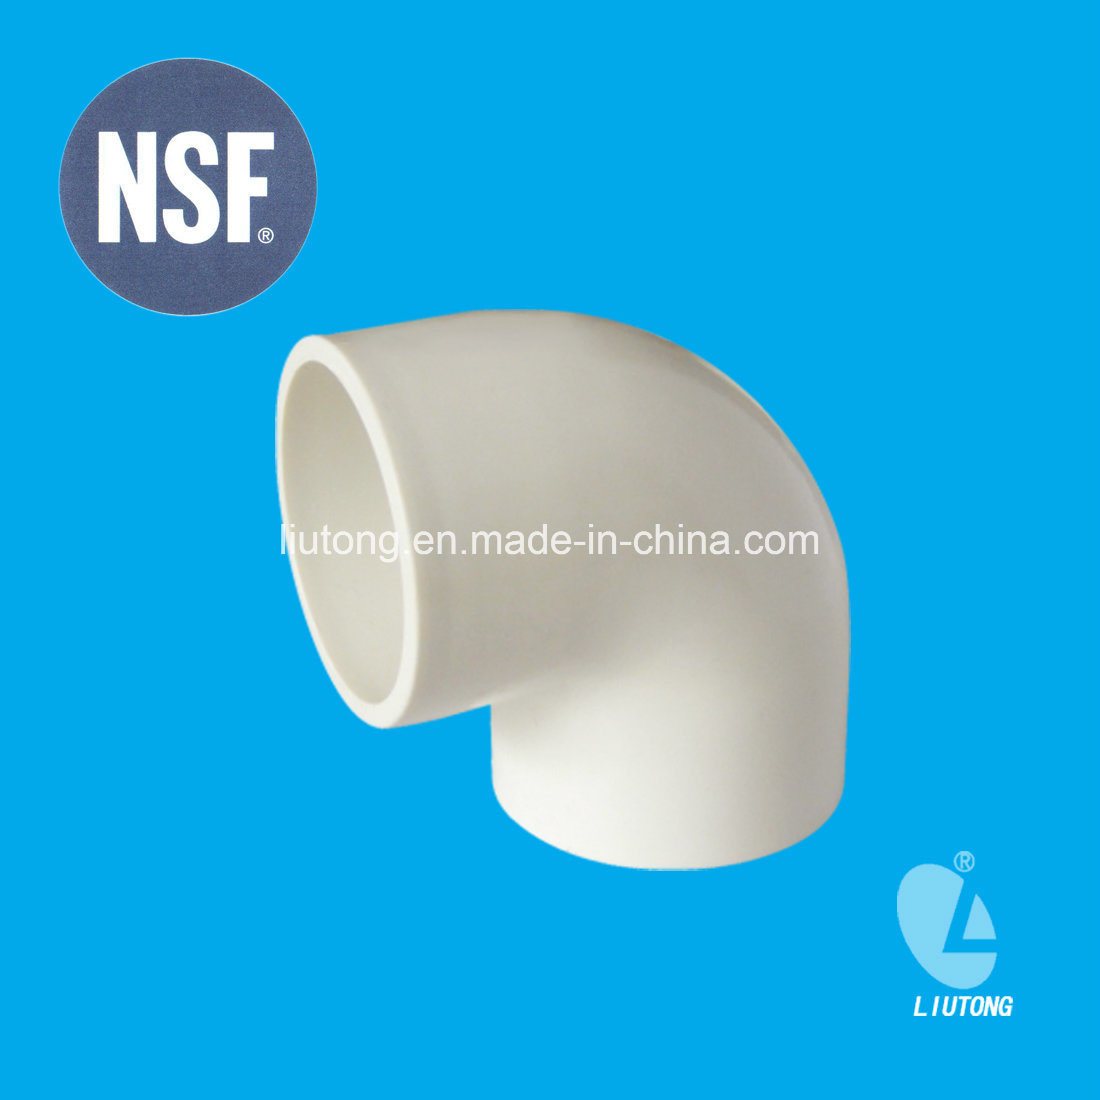 PVC 90deg Elbow ASTM D2466 Standard for Supply Water with NSF Certificate